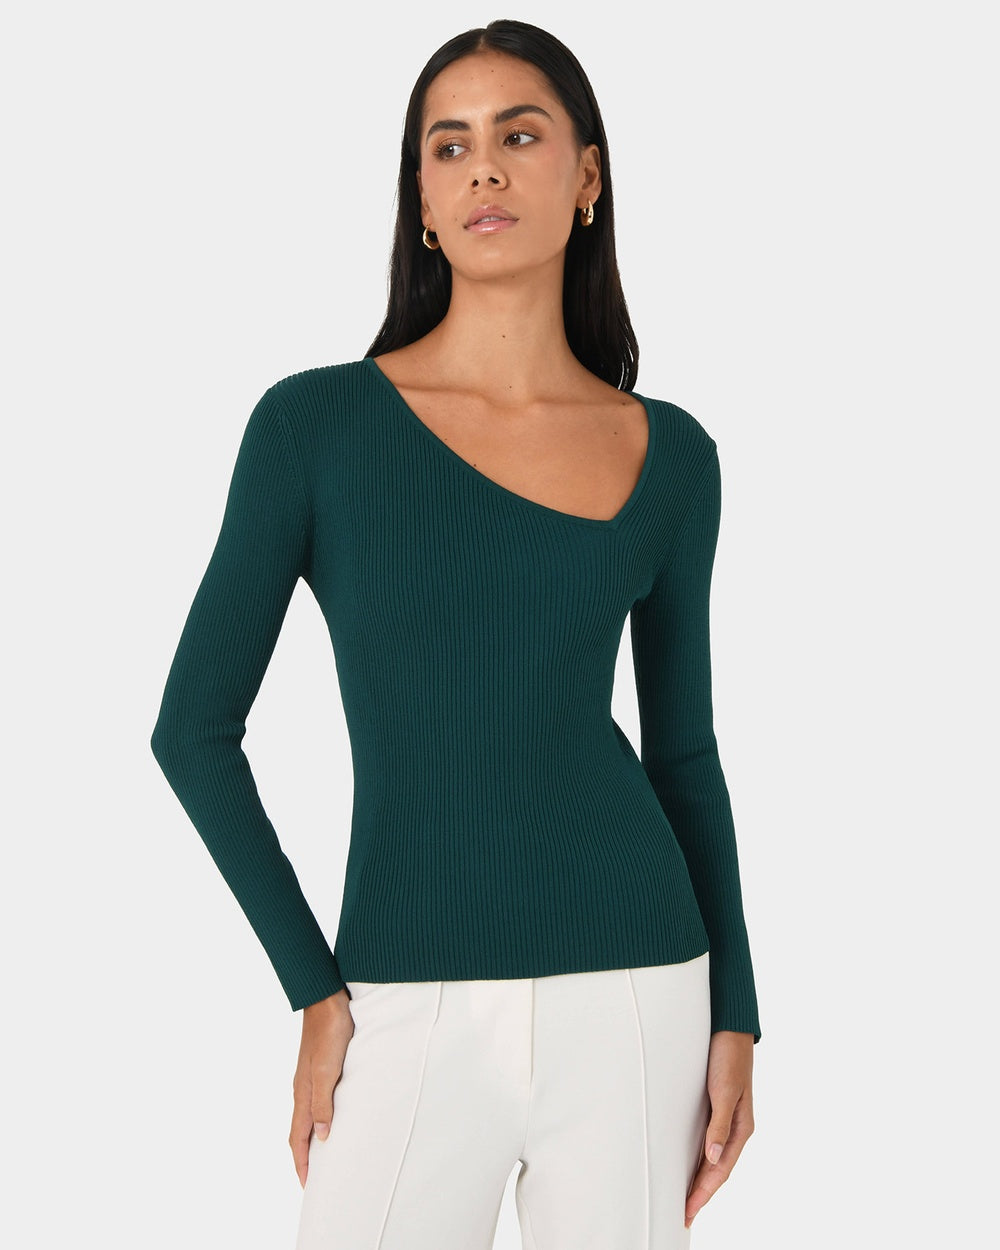 Assymetric Knit Top to pair with pants and jeans